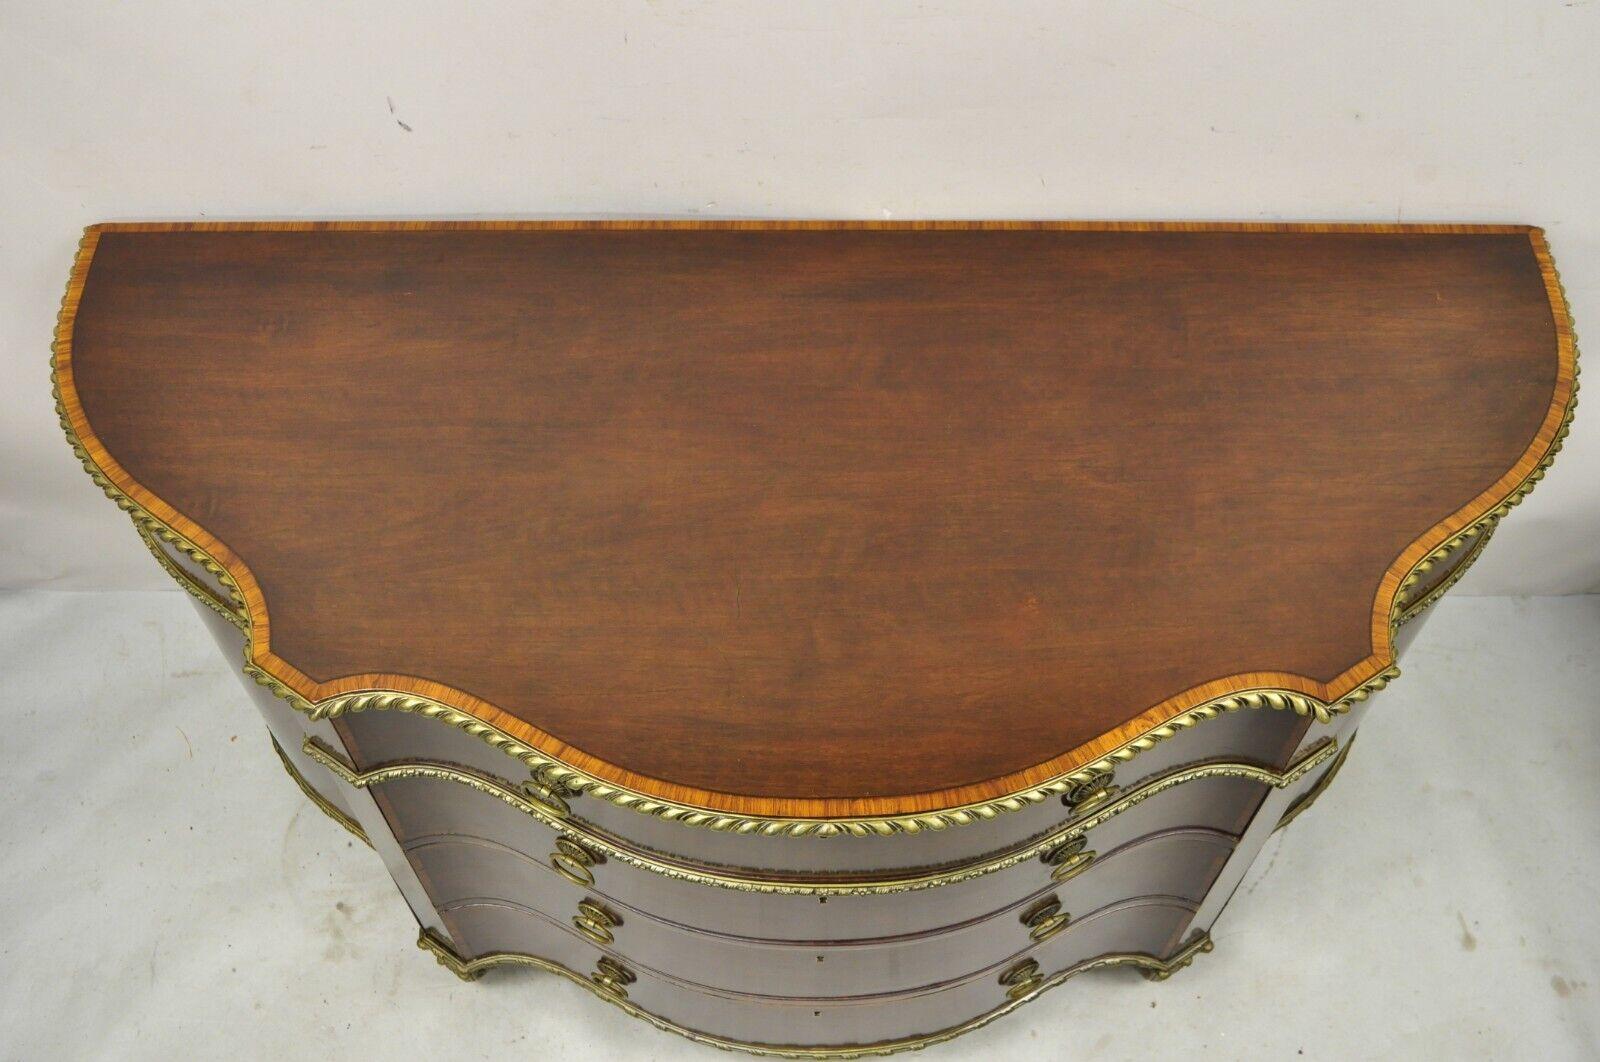 Antique French Louis XVI Style Mahogany Bow Front Bombe Demilune Commode Chest. Item featured is a lower height, shapely demilune form, remarkable cast bronze ormolu and feet, 2 swing doors, beautiful wood grain, banded inlay throughout, 4